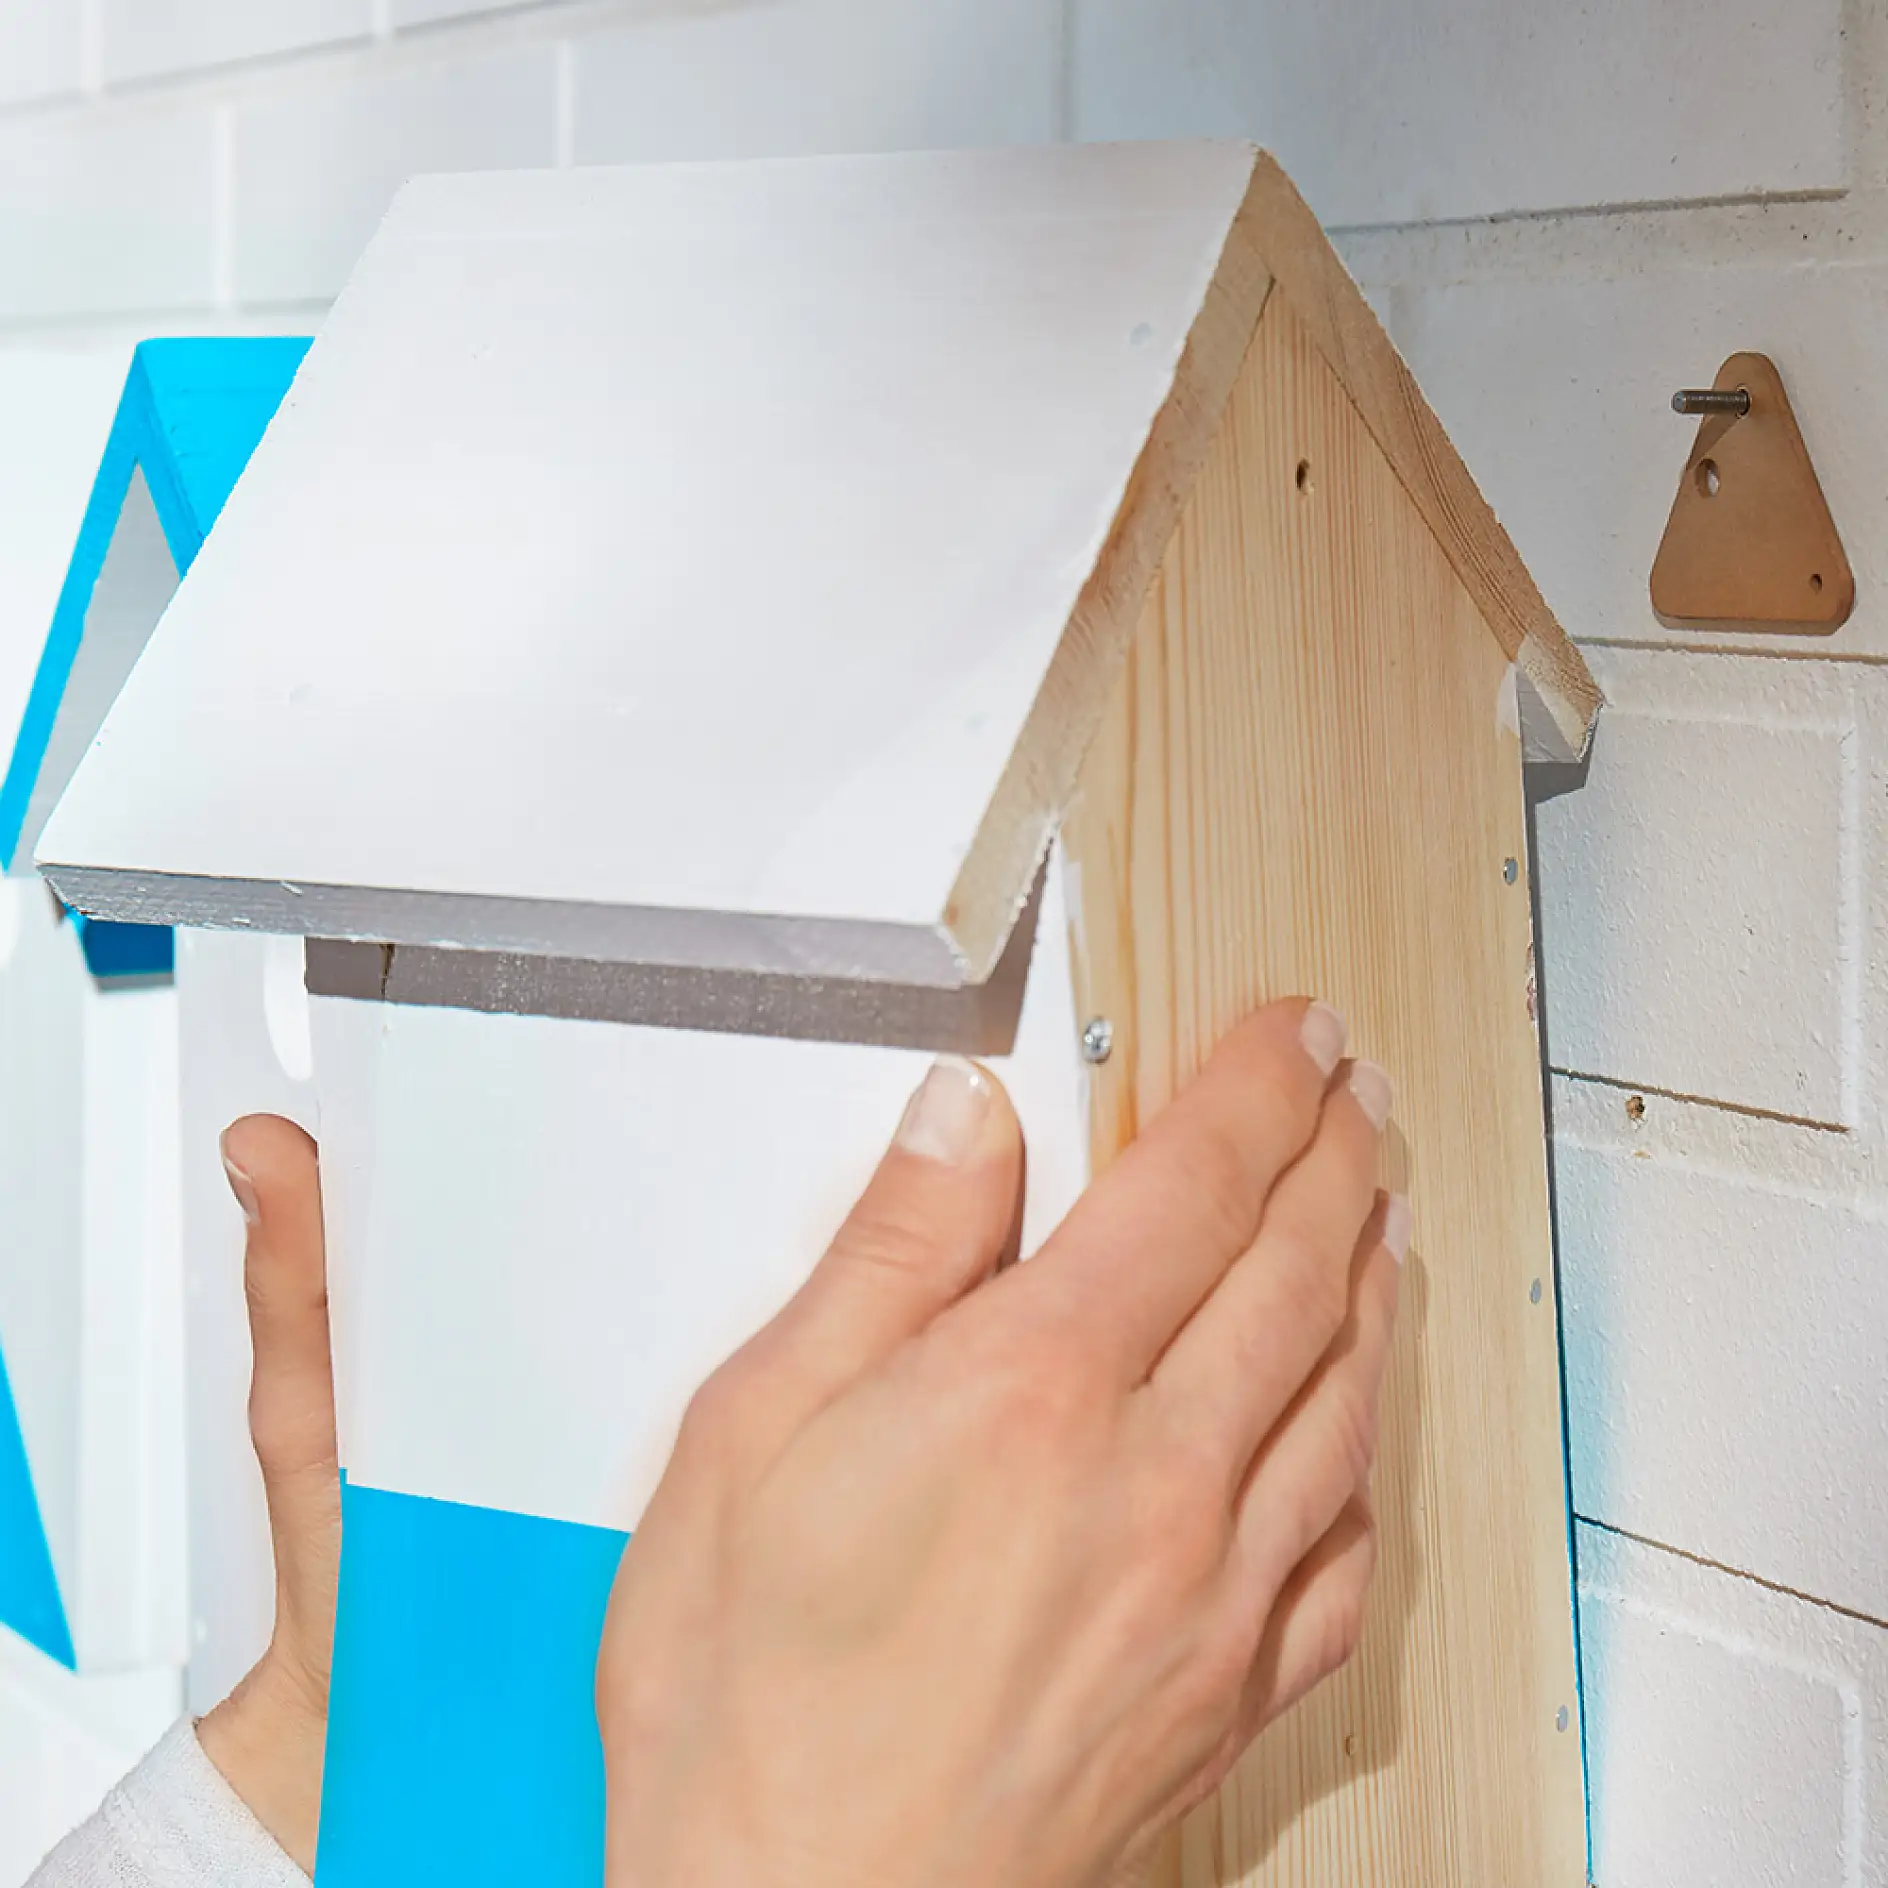 Using a tesa® adhesive screw triangular for brick & stone 10kg to wall mount a wooden bird house.